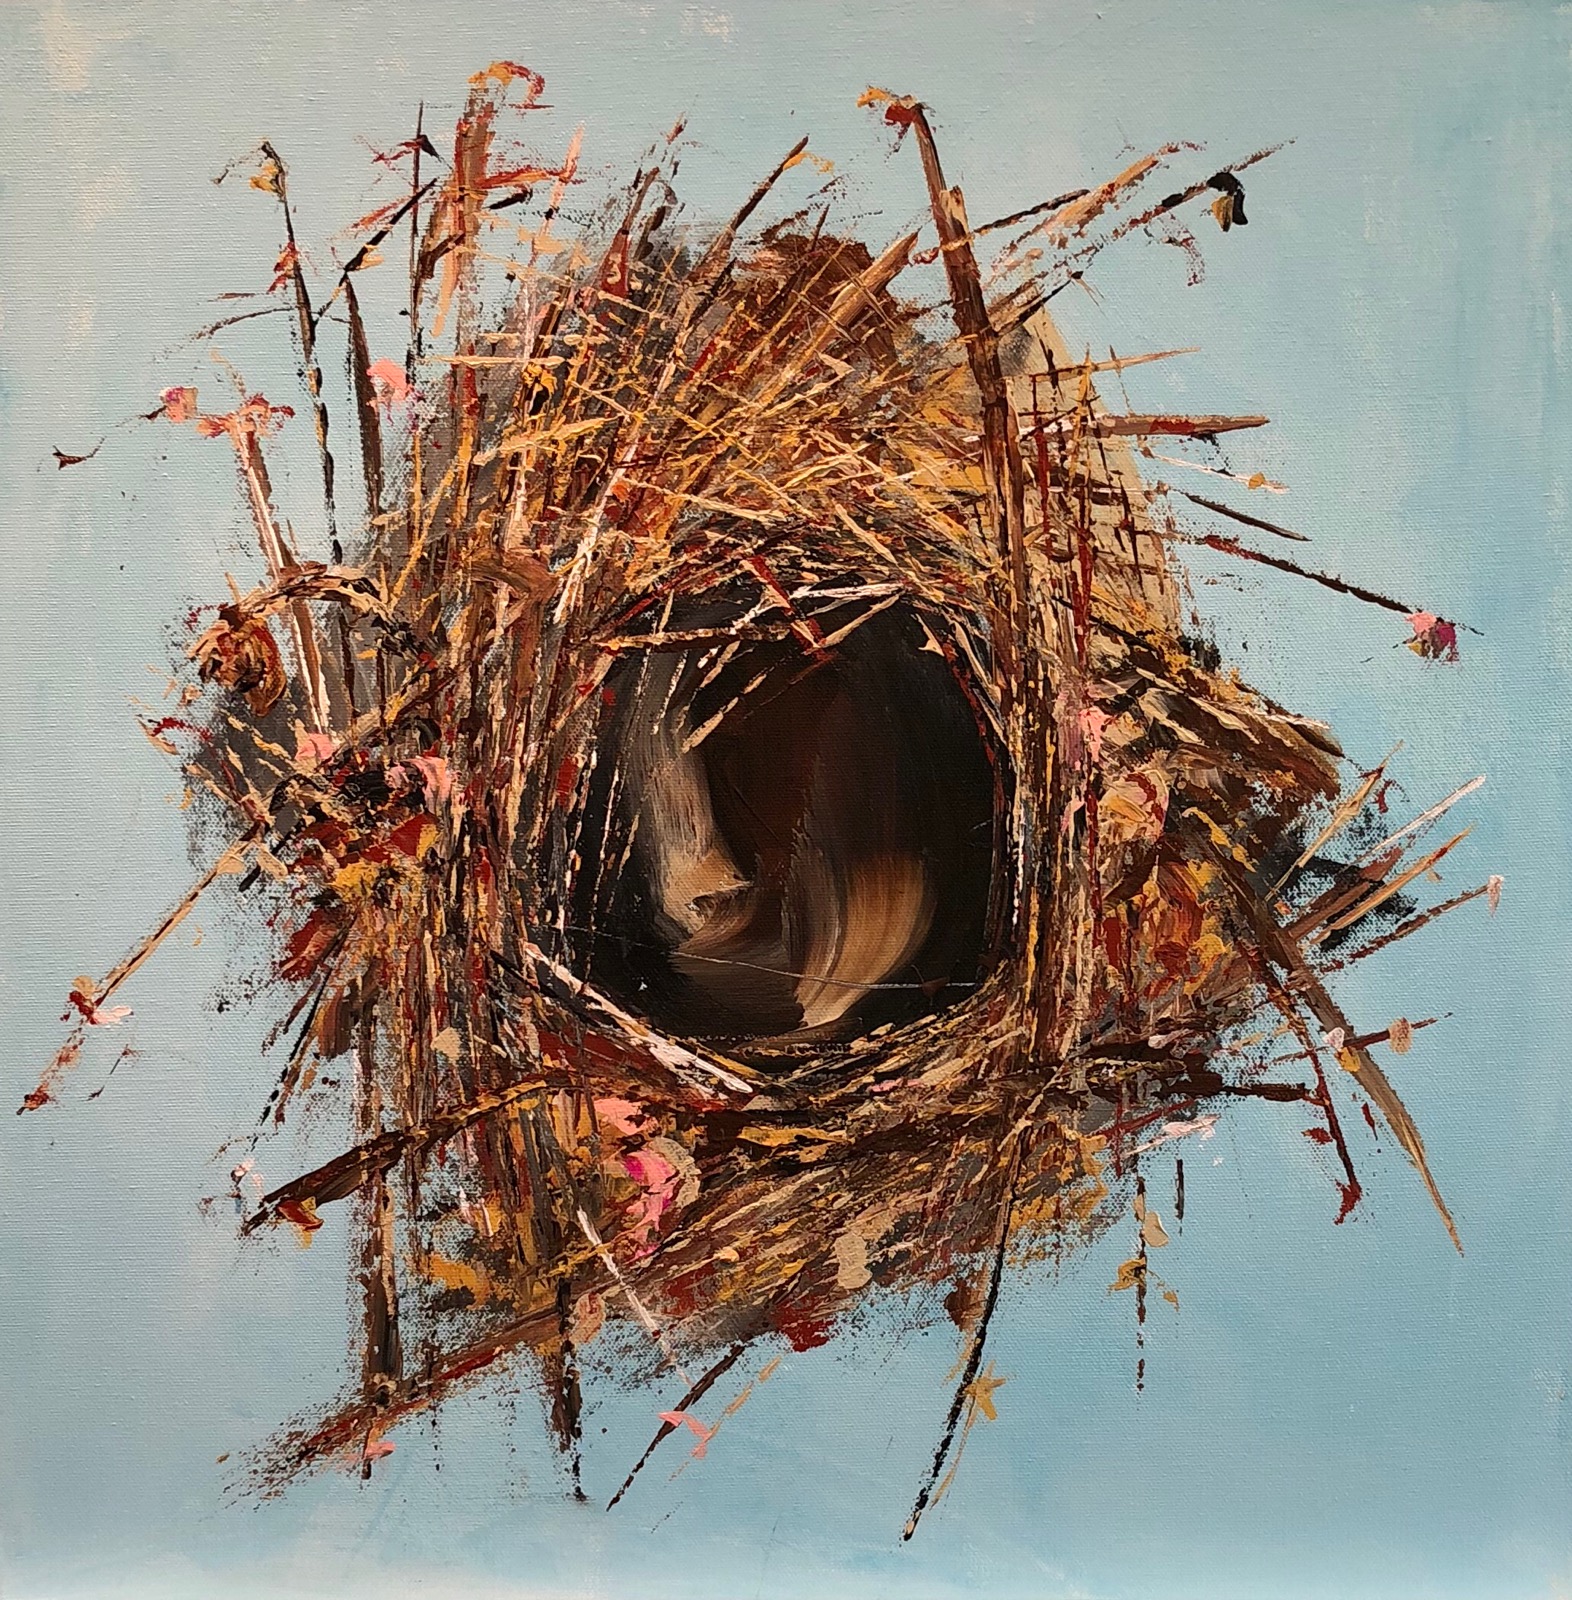 Palette Knife Painting: Bird's Nest - Academy Center of the Arts